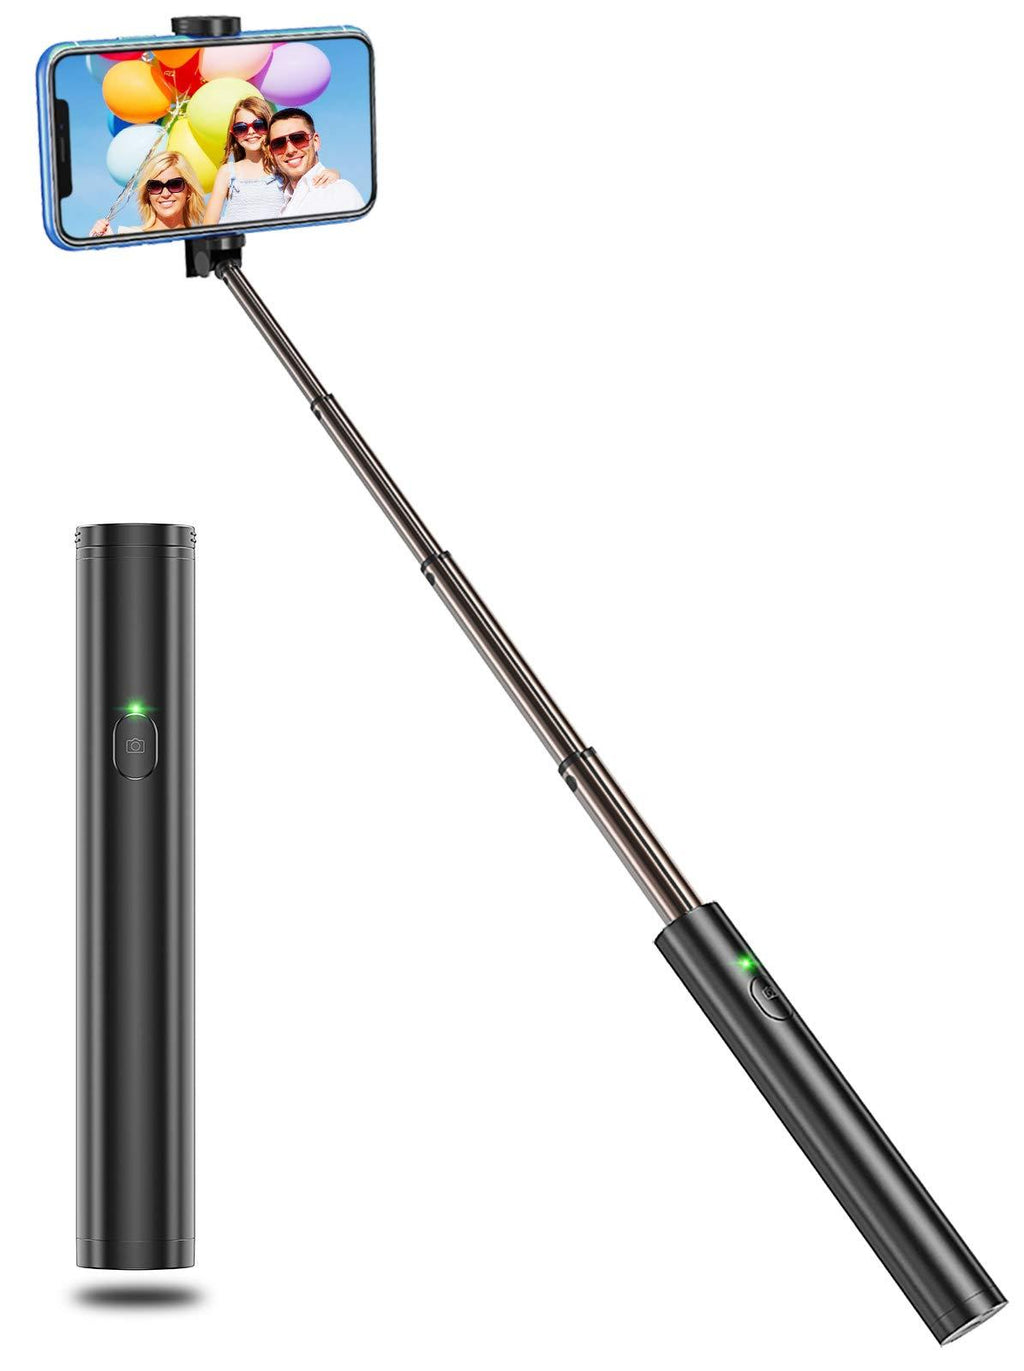 Vproof Selfie Stick Bluetooth, Lightweight Aluminum All in One Extendable Selfie Sticks Compact Design, Compatible with iPhone 12 Pro Max/12 Pro/12/11 Pro Max/11 Pro/11/XS Max, Galaxy S20, More